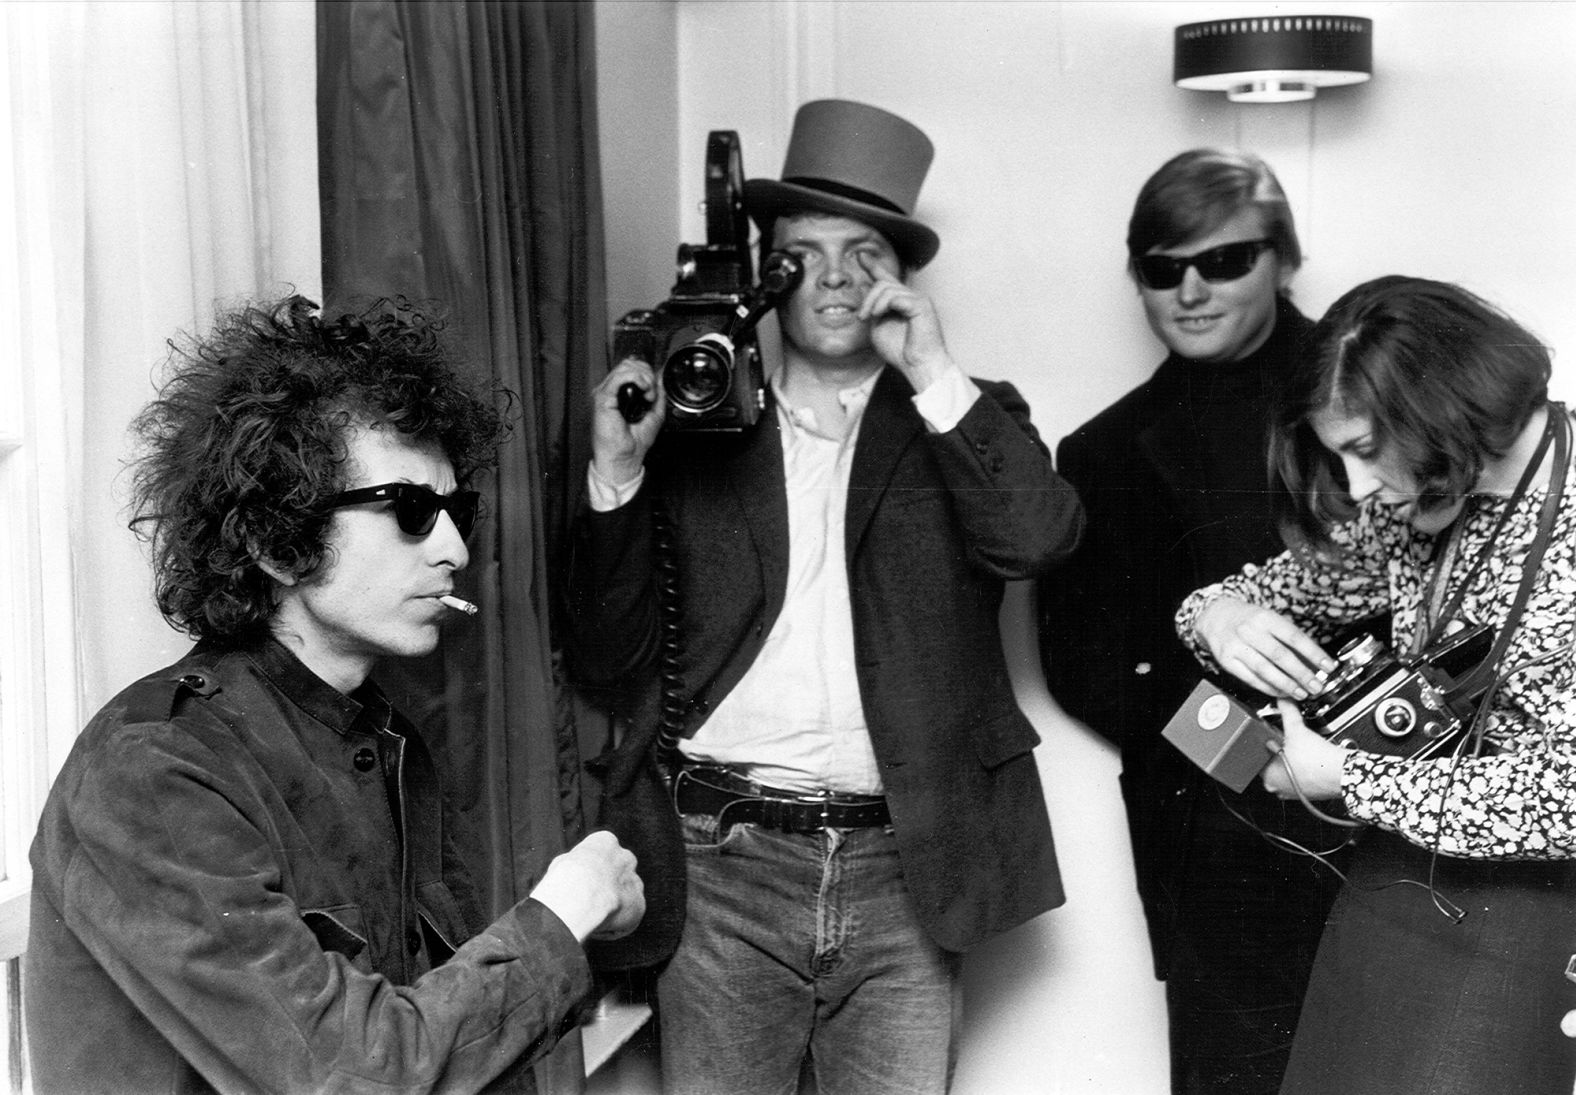 Dylan smokes a cigarette as D.A. Pennebaker films "Don't Look Back," a documentary film about Dylan's tour of England in 1965.